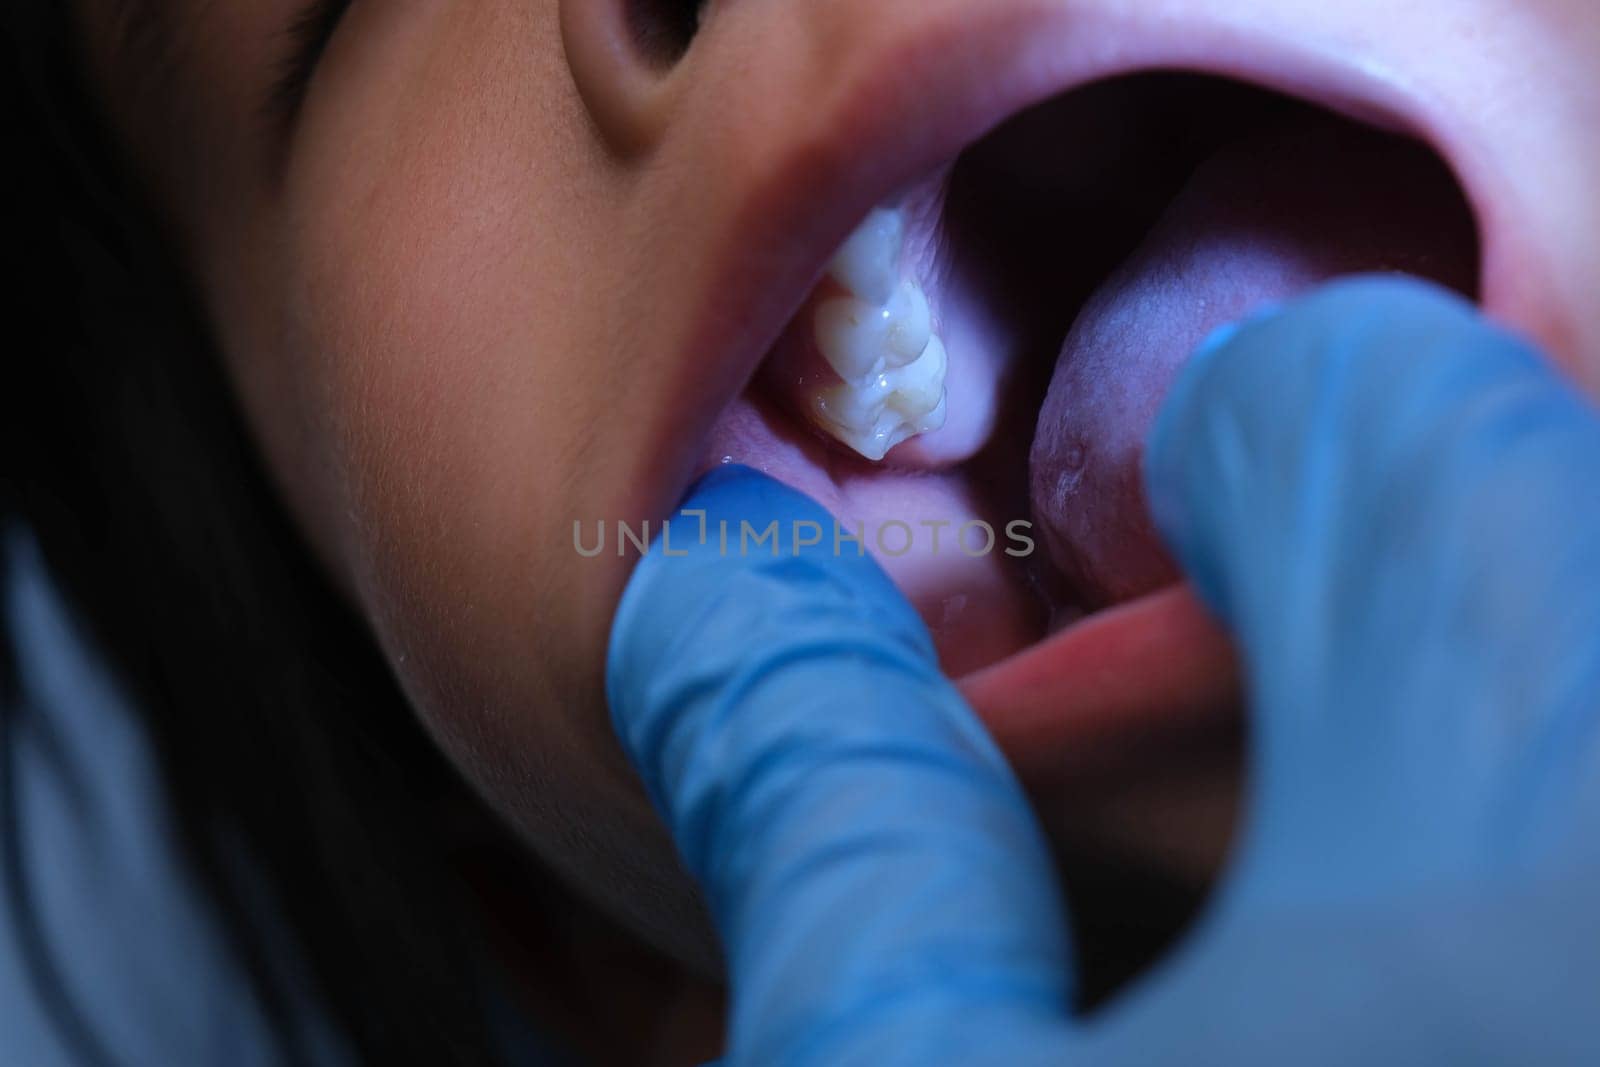 Close-up inside the oral cavity of a healthy child with beautiful rows of baby teeth. Young girl opens mouth revealing upper and lower teeth, hard palate, soft palate, dental and oral health checkup.